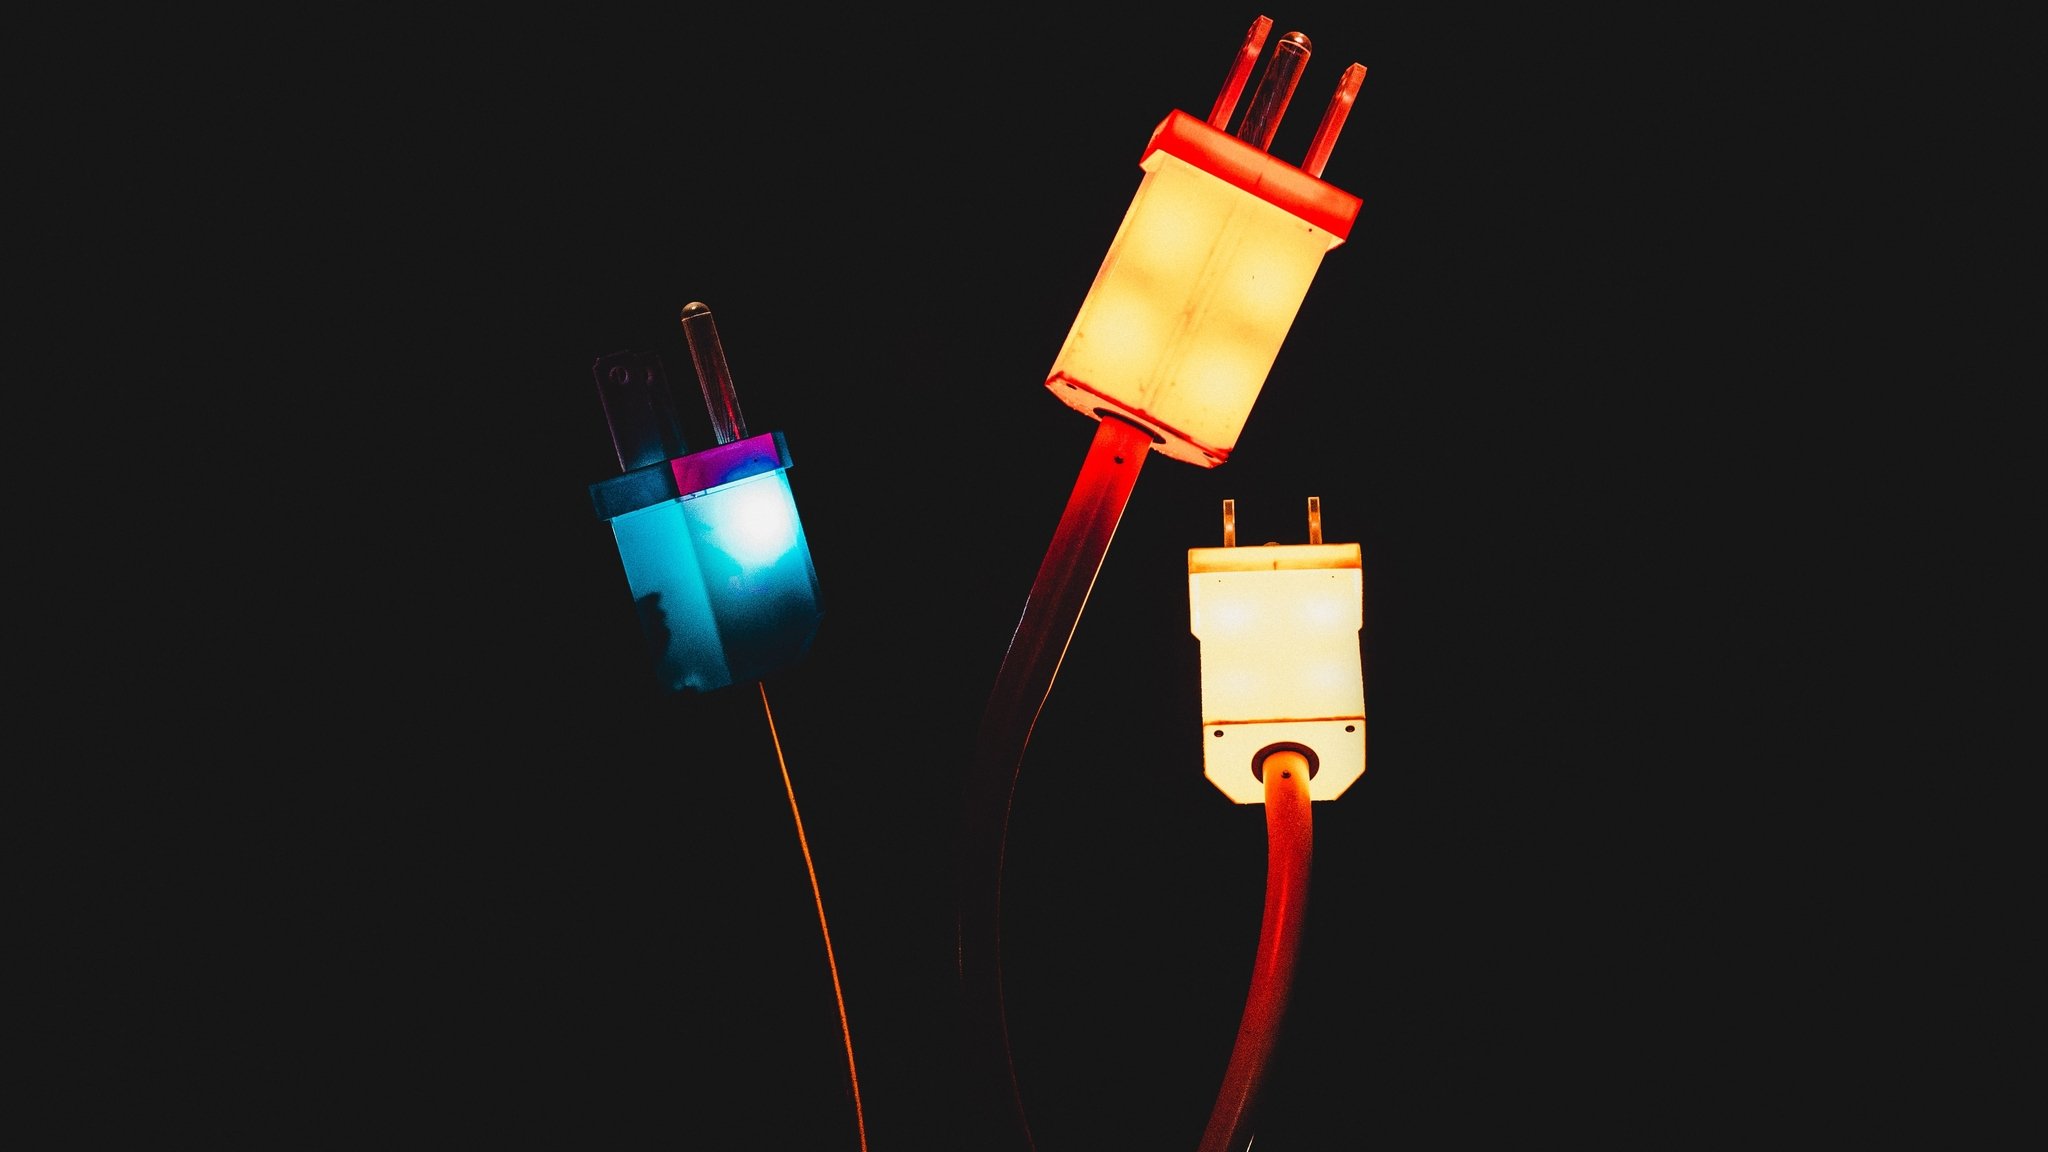 Glowing cables